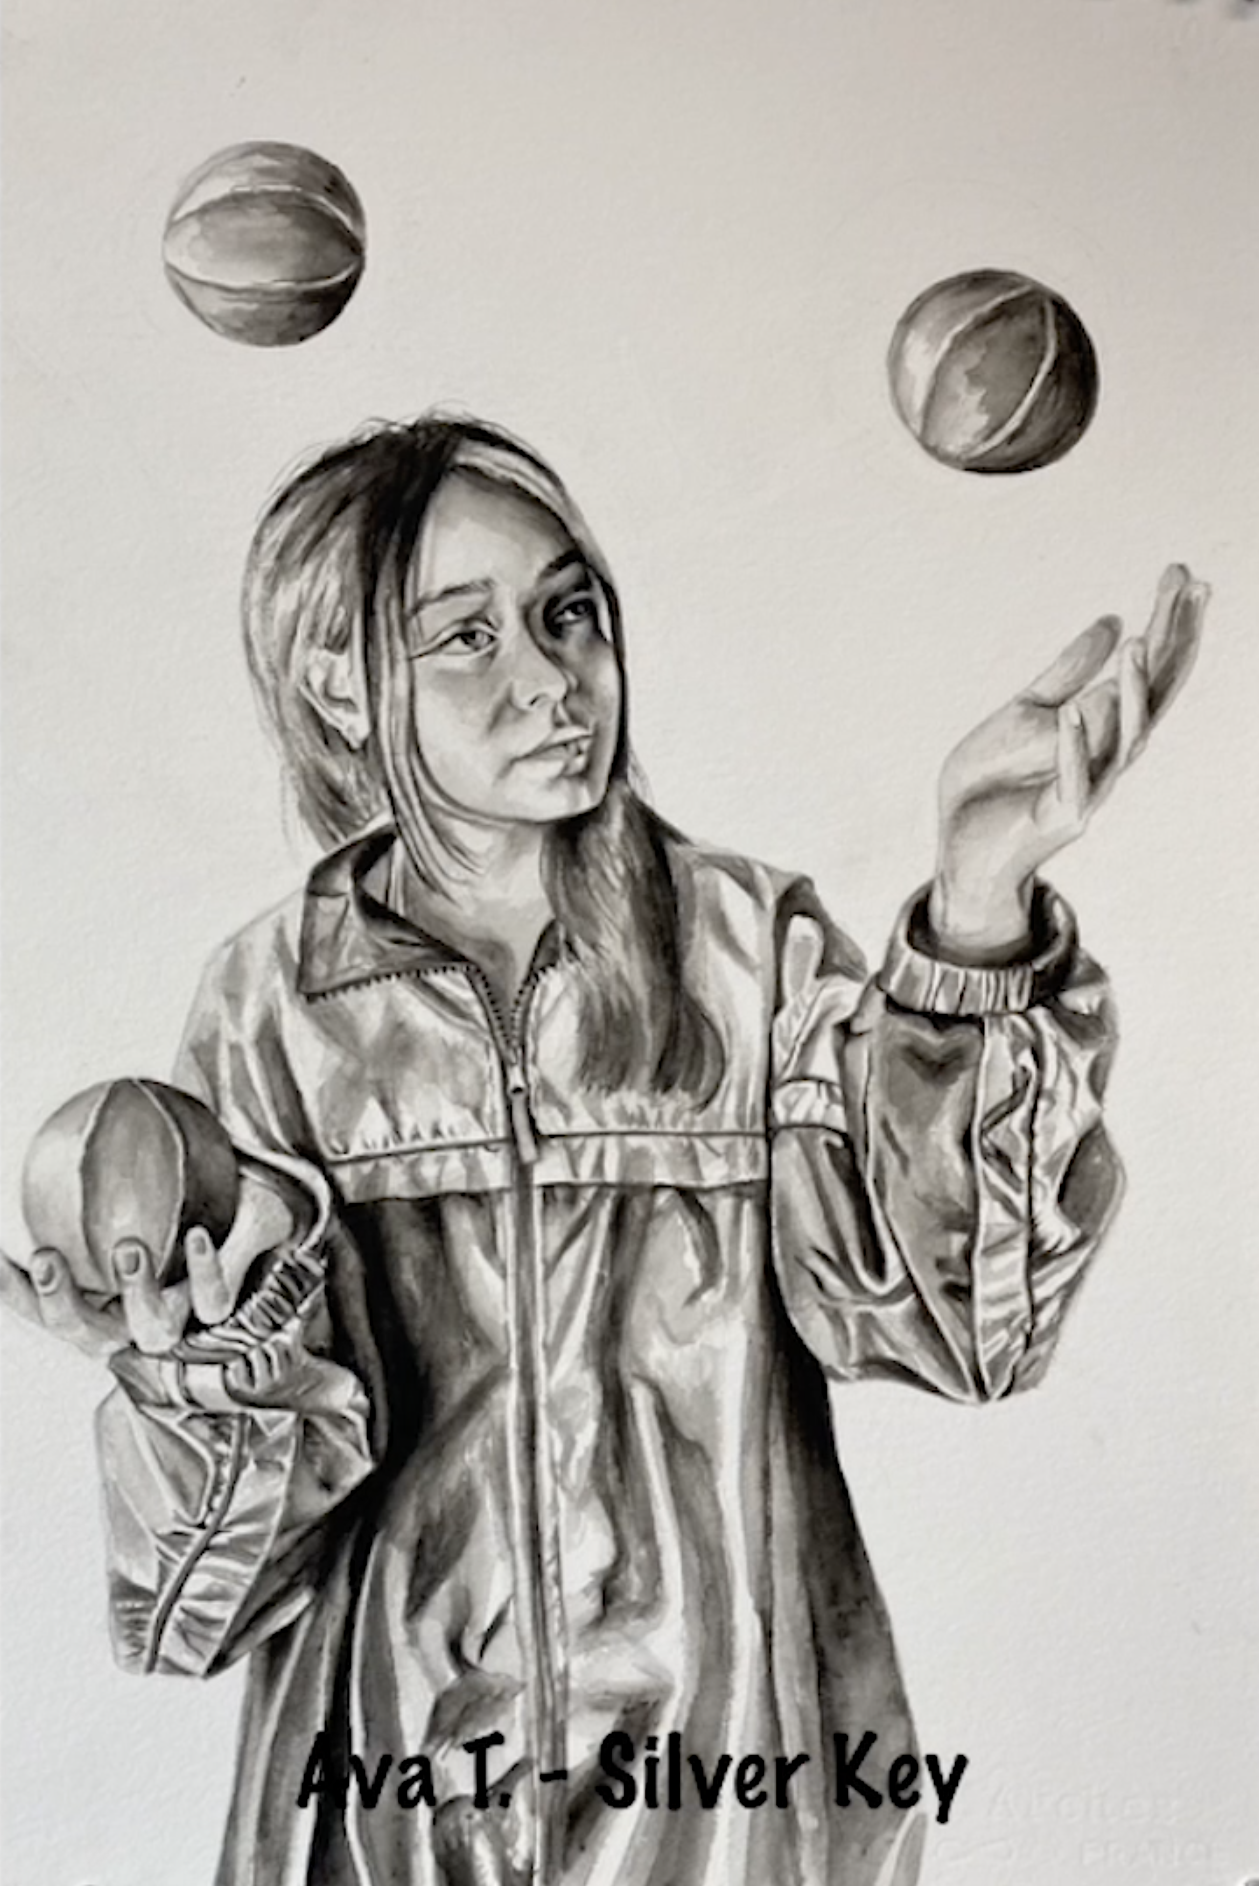 A student drawing